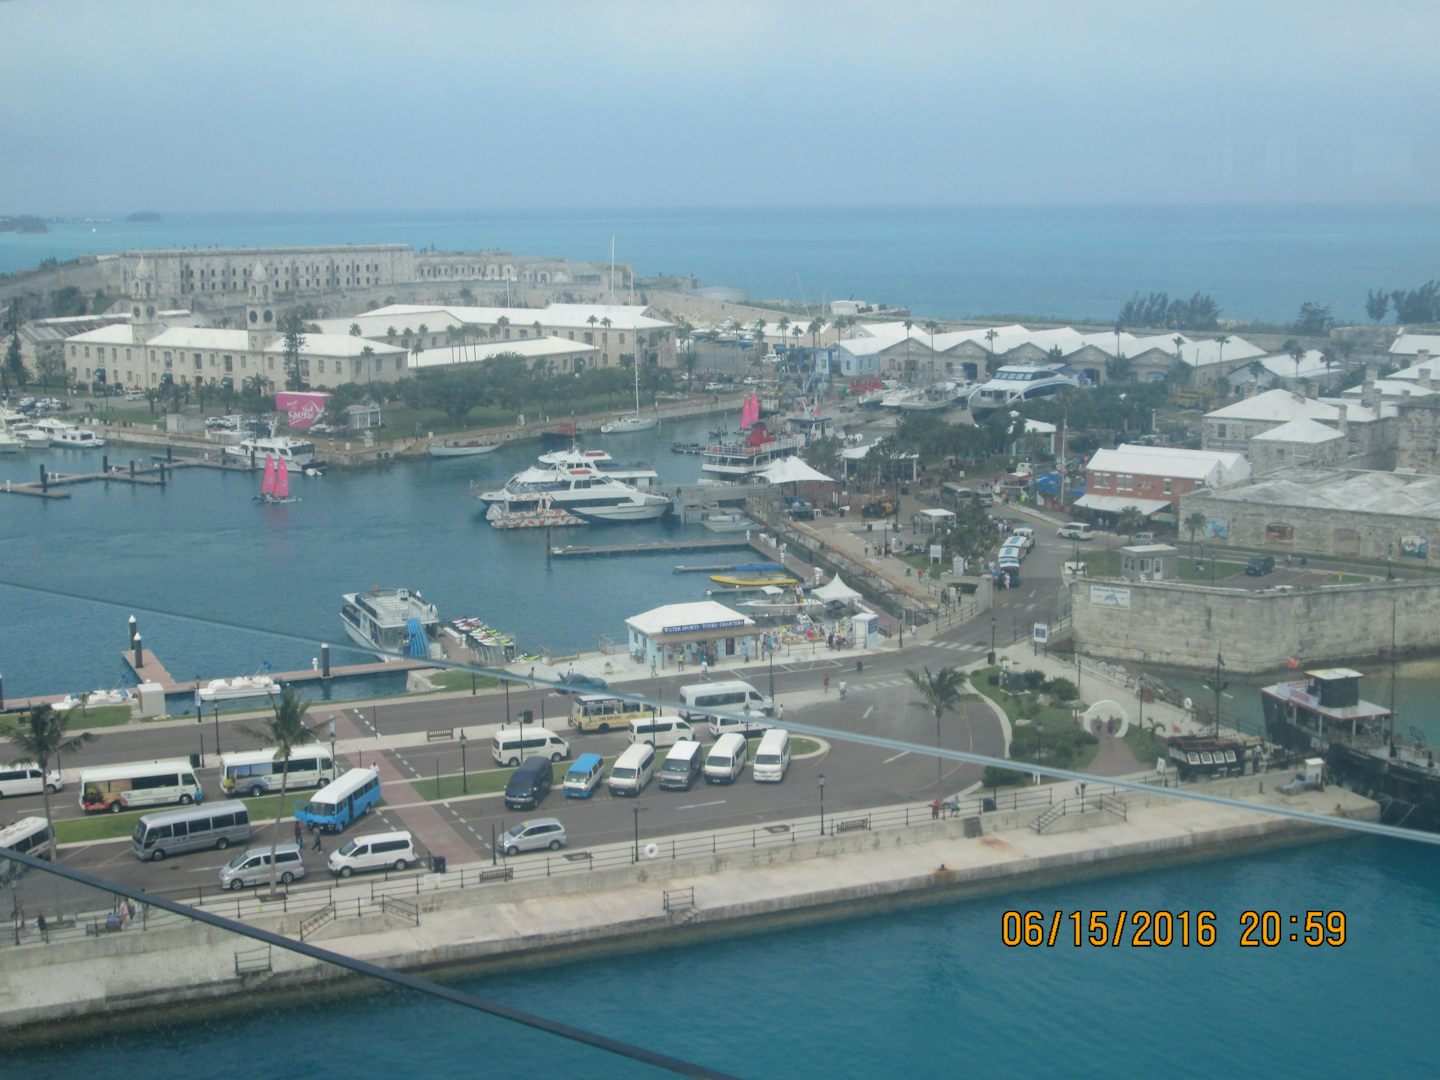 This is a photo of King's Wharf Naval Dockyard.